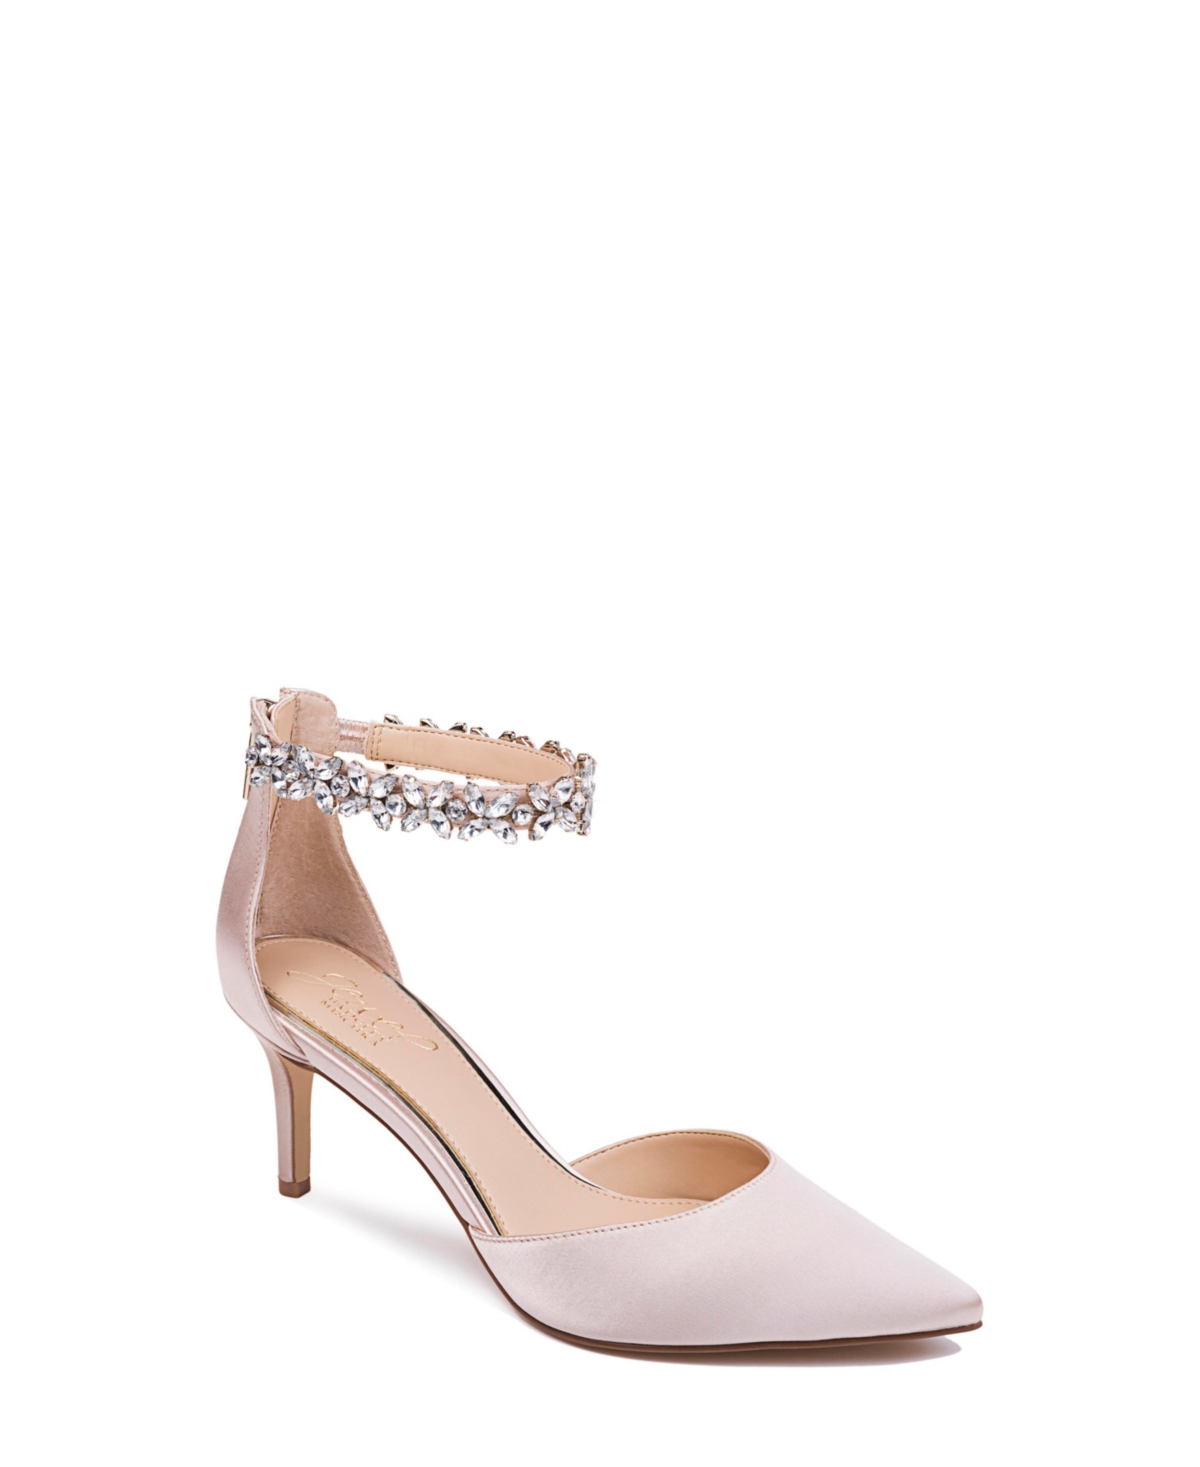 Jewel Badgley Mischka Raleigh Ornamented Pumps In Champagne Satin